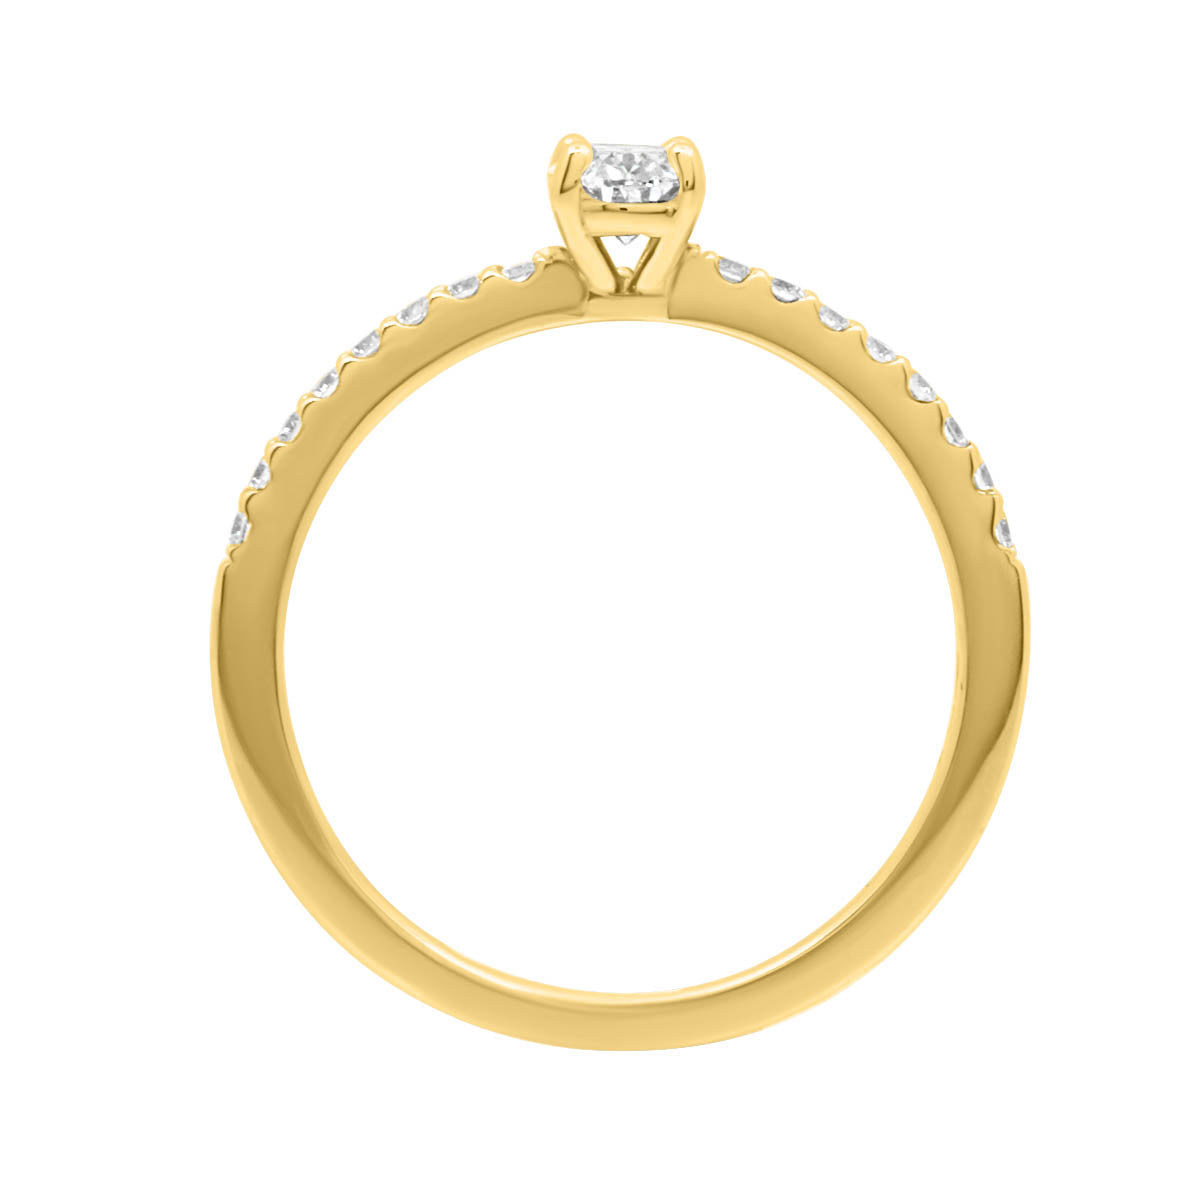 Oval with Scallop Set Band in yellow gold in an upright position